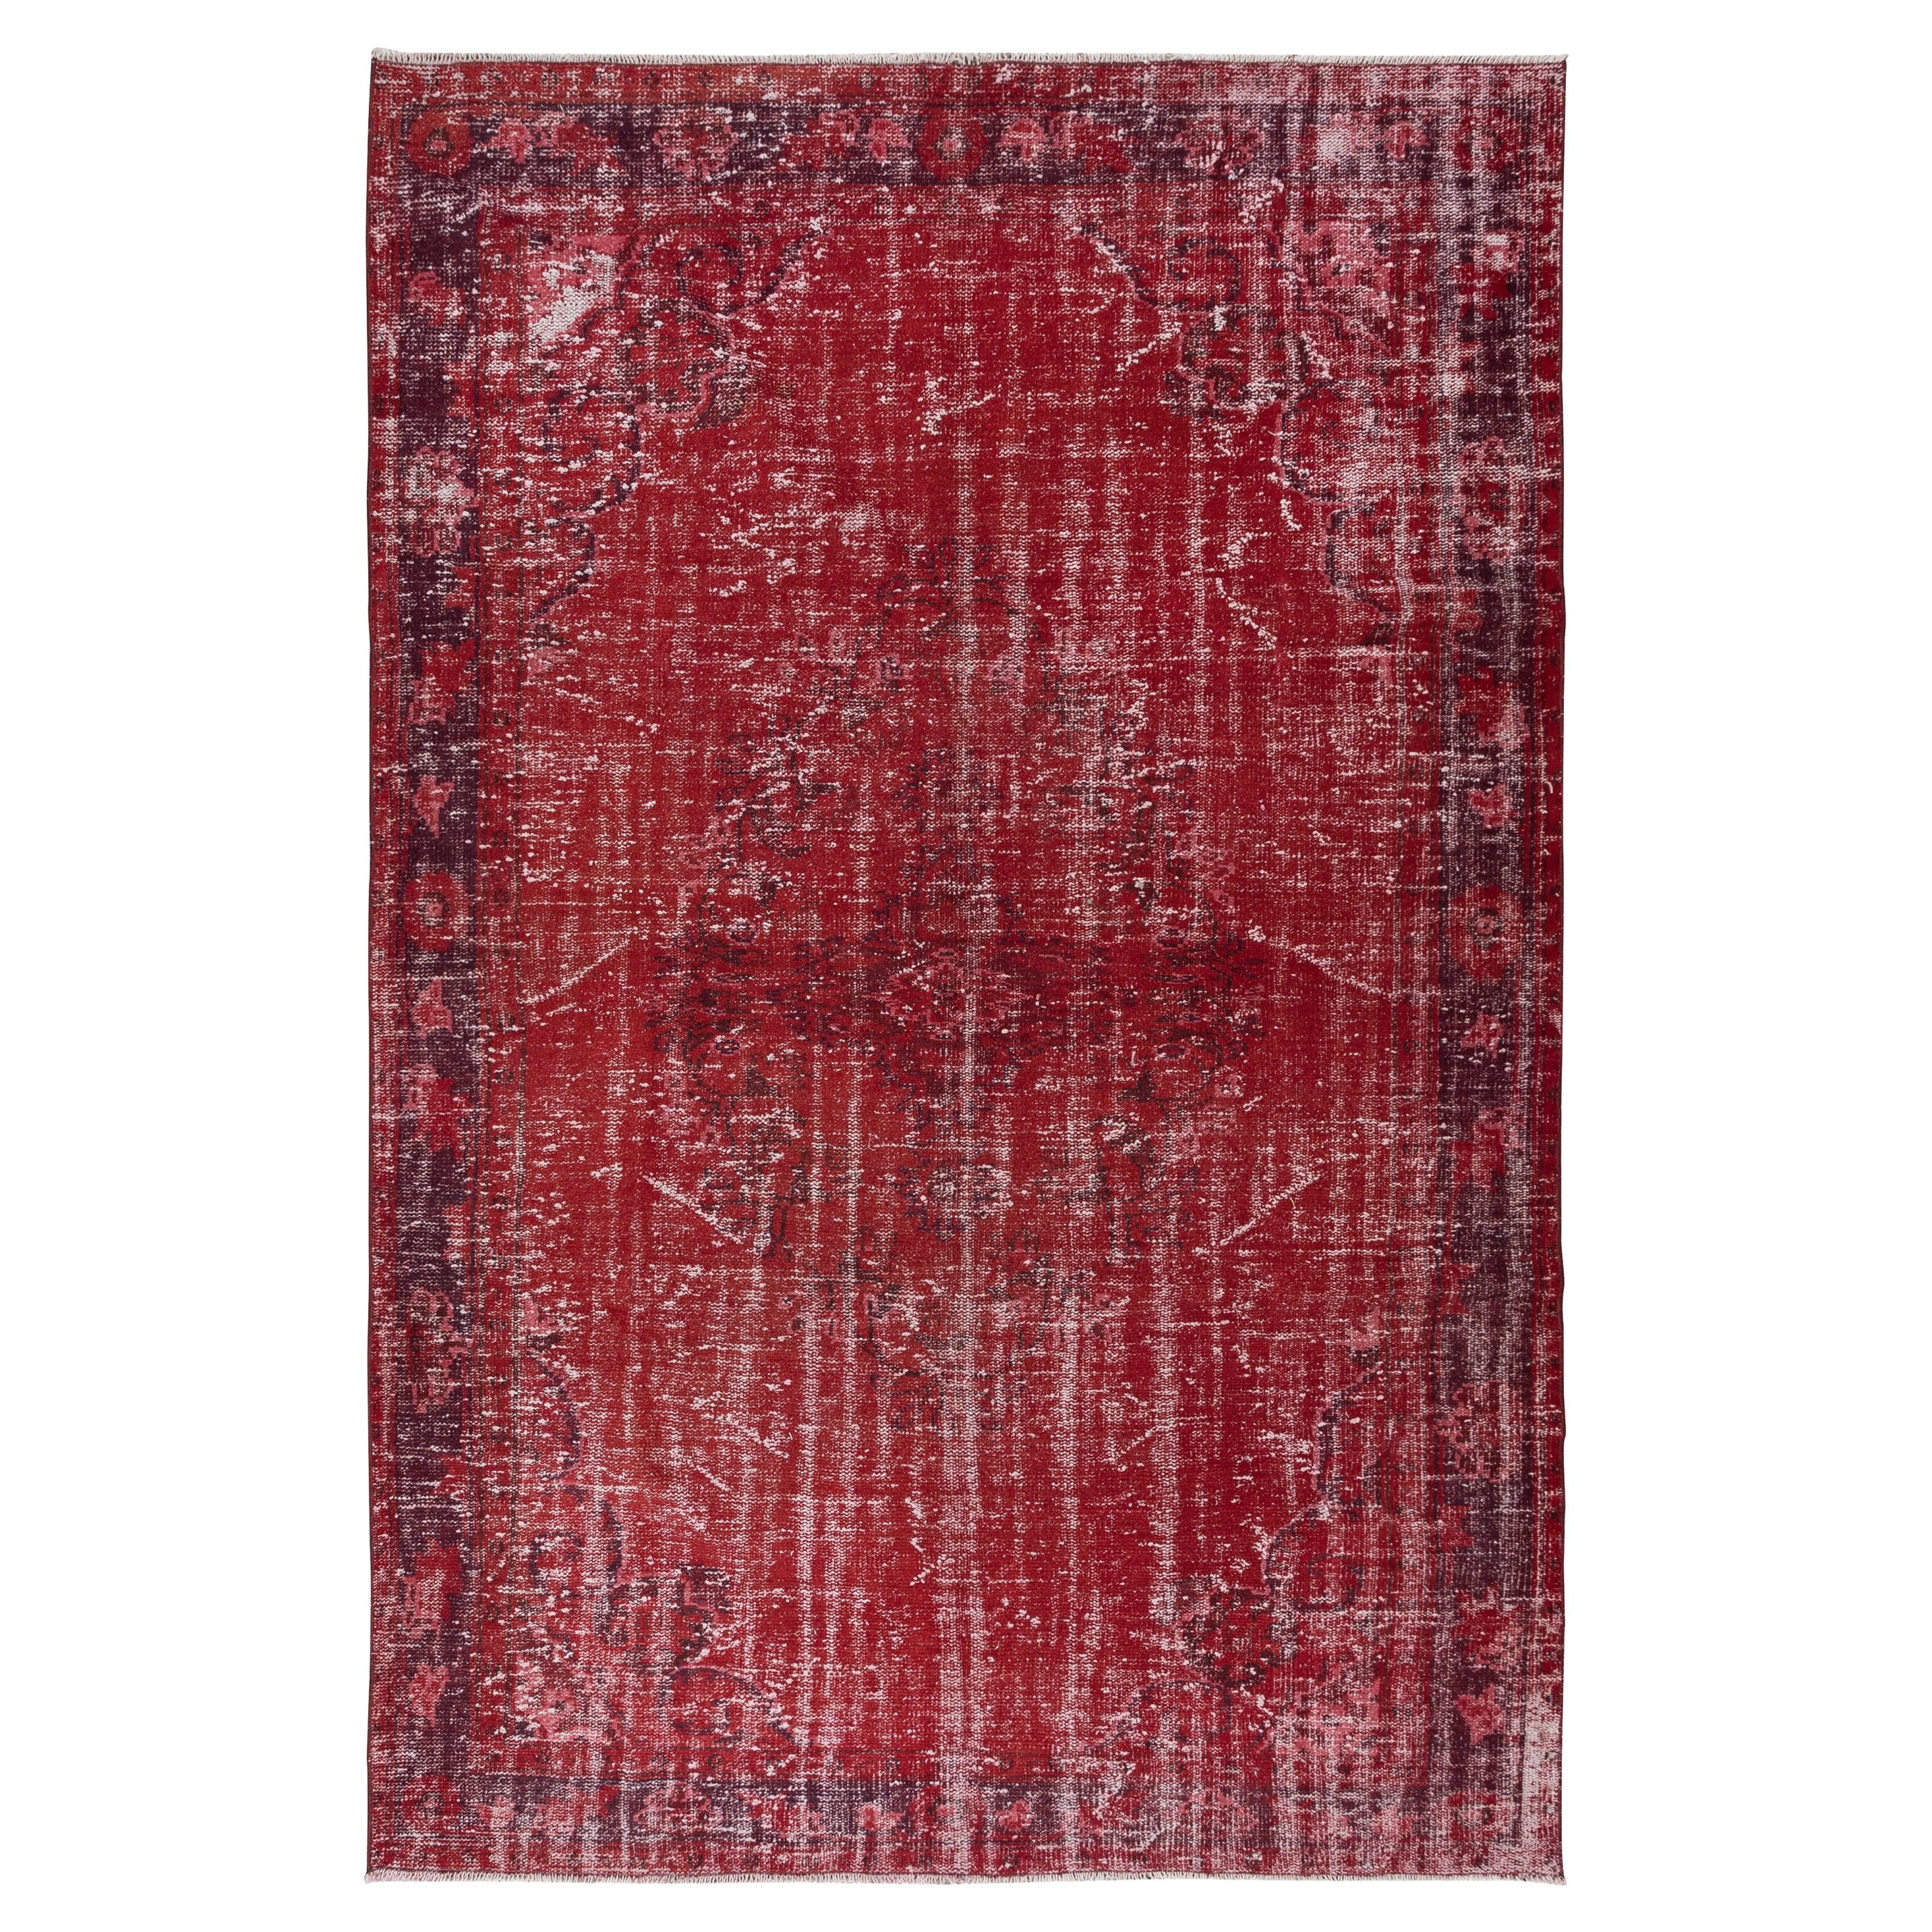 6x9.2 Ft Contemporary Handmade Turkish Red Area Rug mit Shabby Chic Style